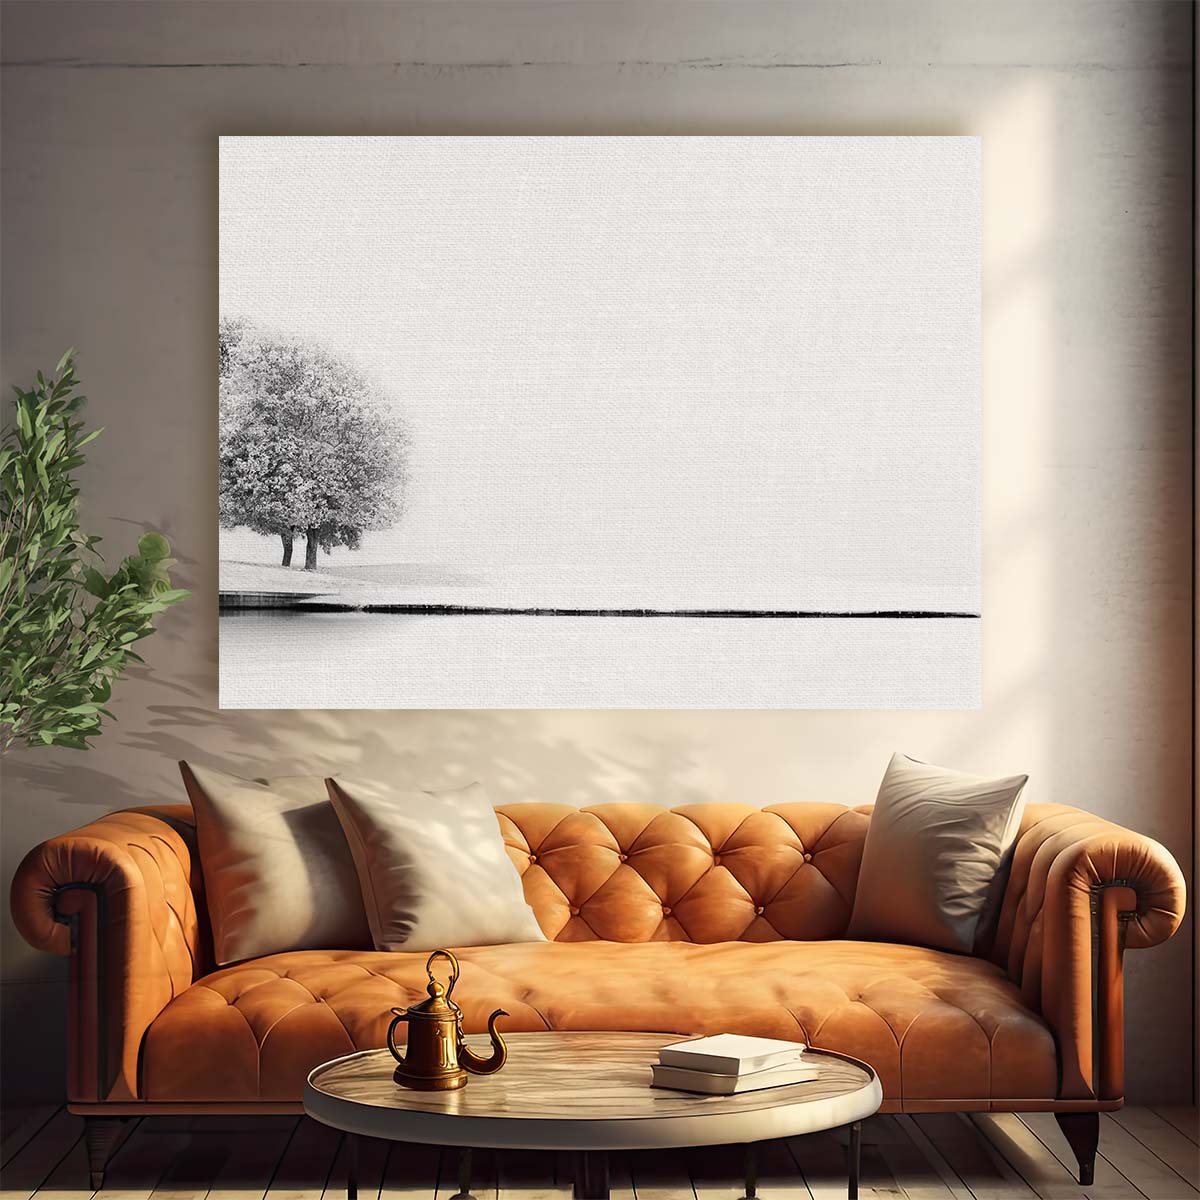 Minimalist Winter Snowscape Monochrome Lake Wall Art by Luxuriance Designs. Made in USA.